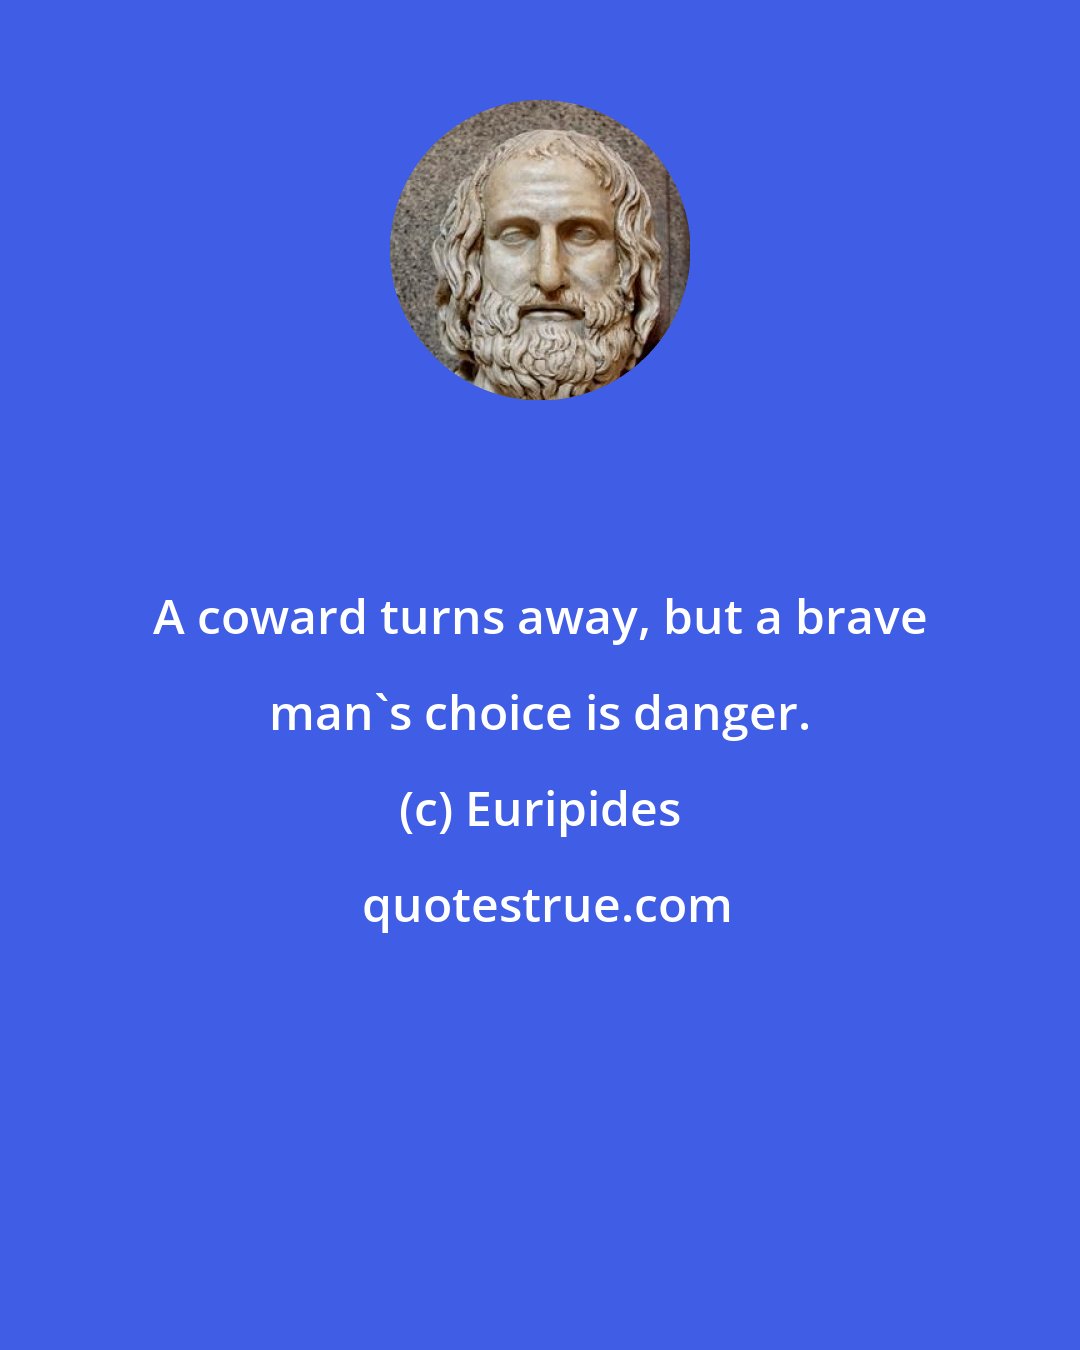 Euripides: A coward turns away, but a brave man's choice is danger.